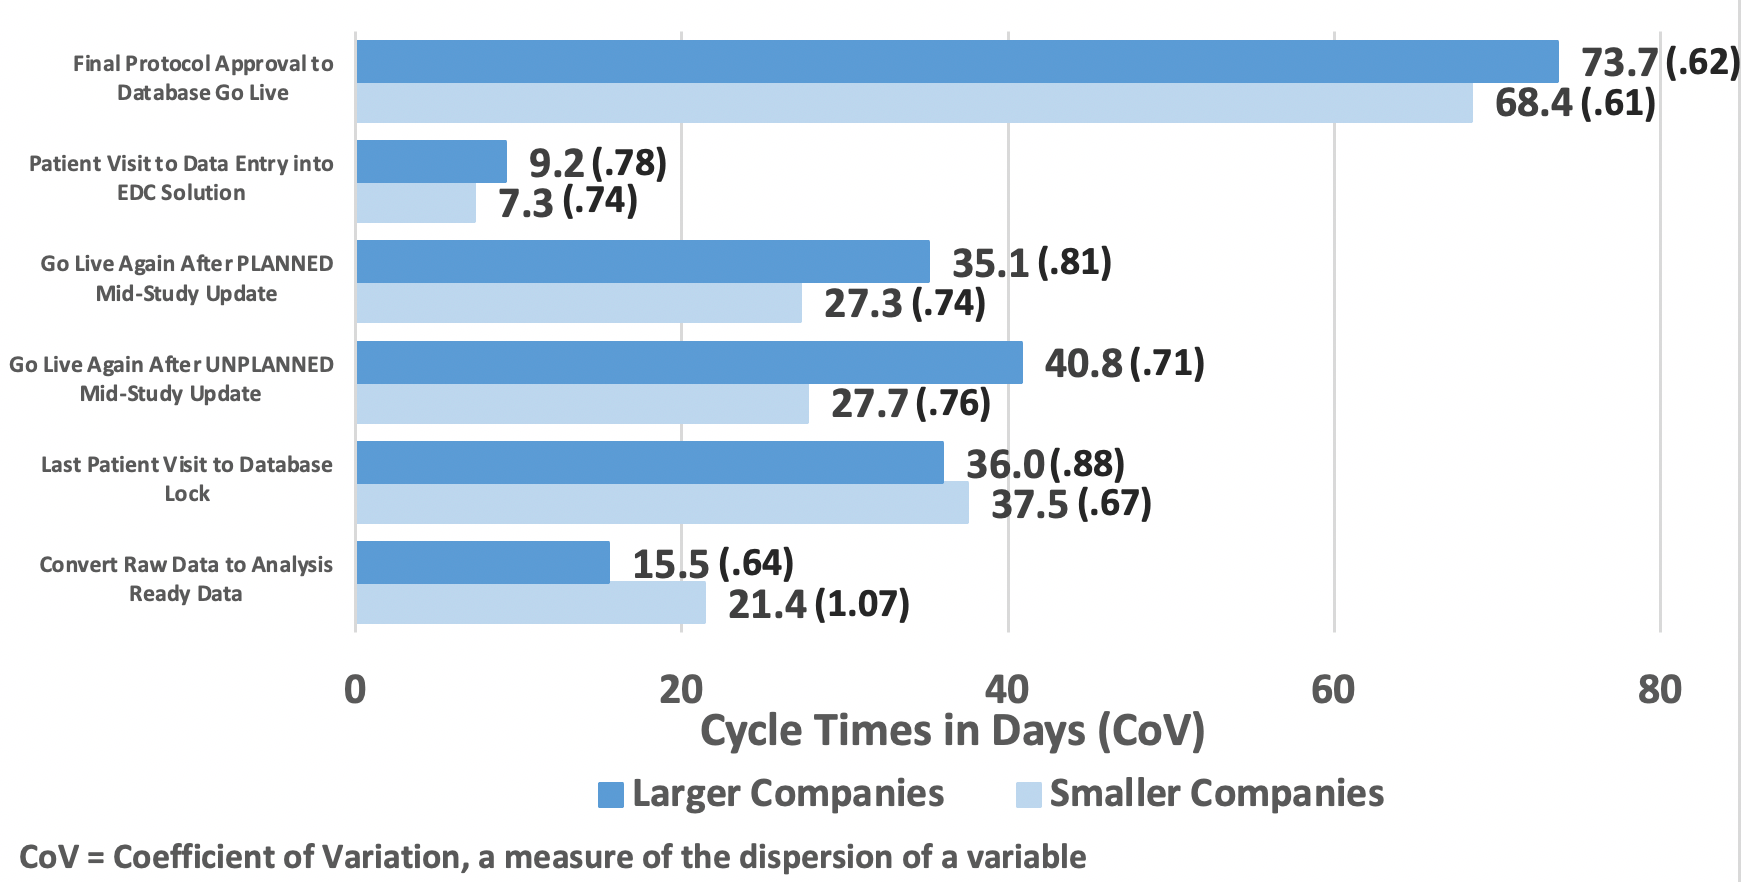 Figure 2. Granular Data Management Cycle Times Between Small and Large Companies